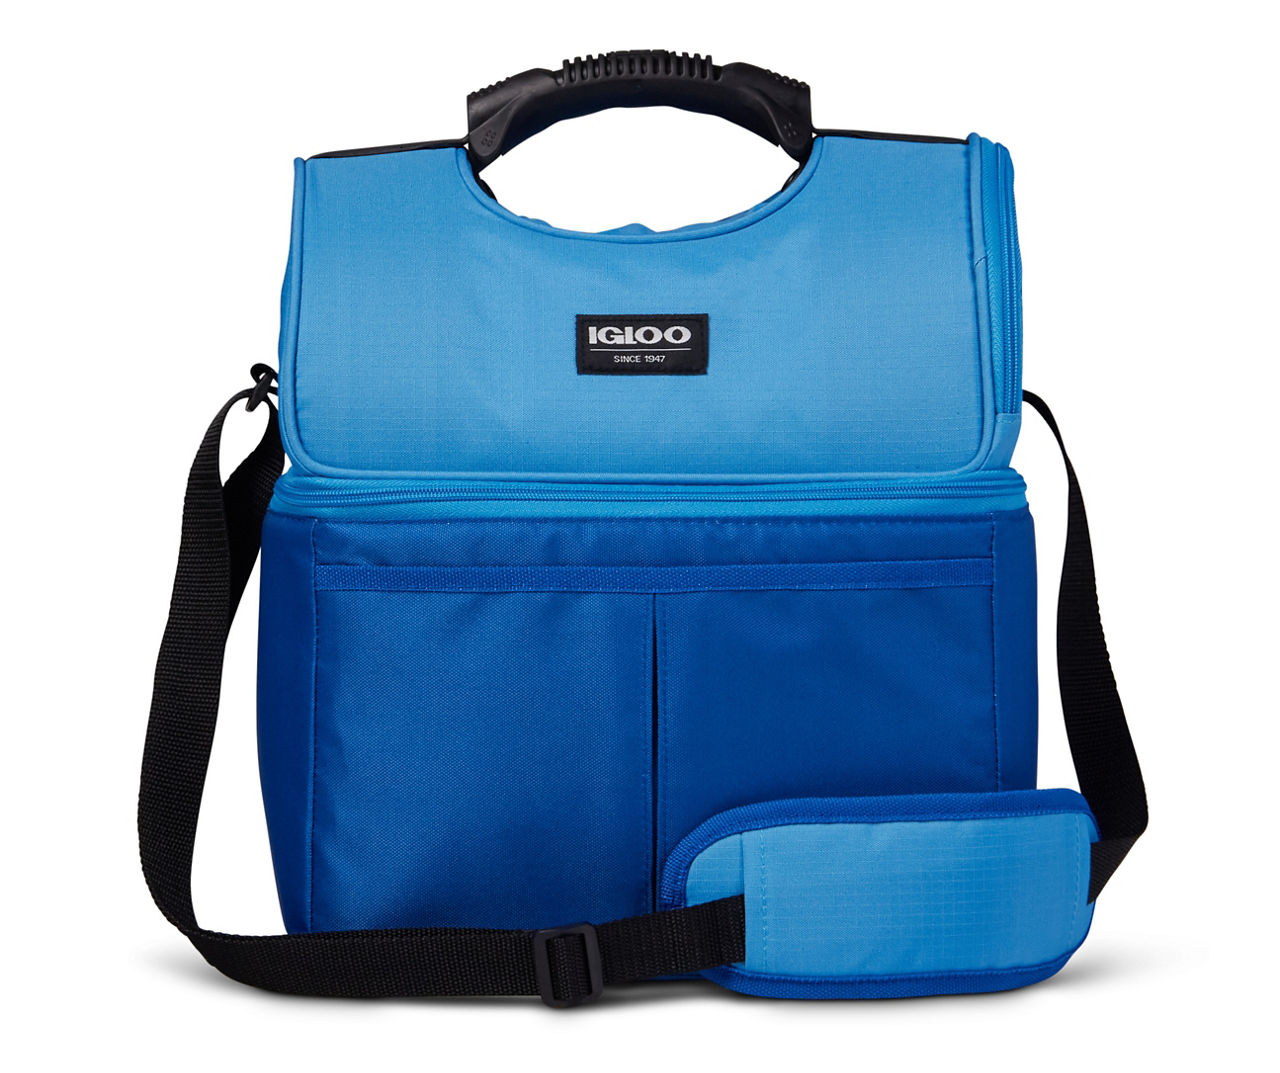 MaxCold Playmate Gripper 16-Can Cooler Bag